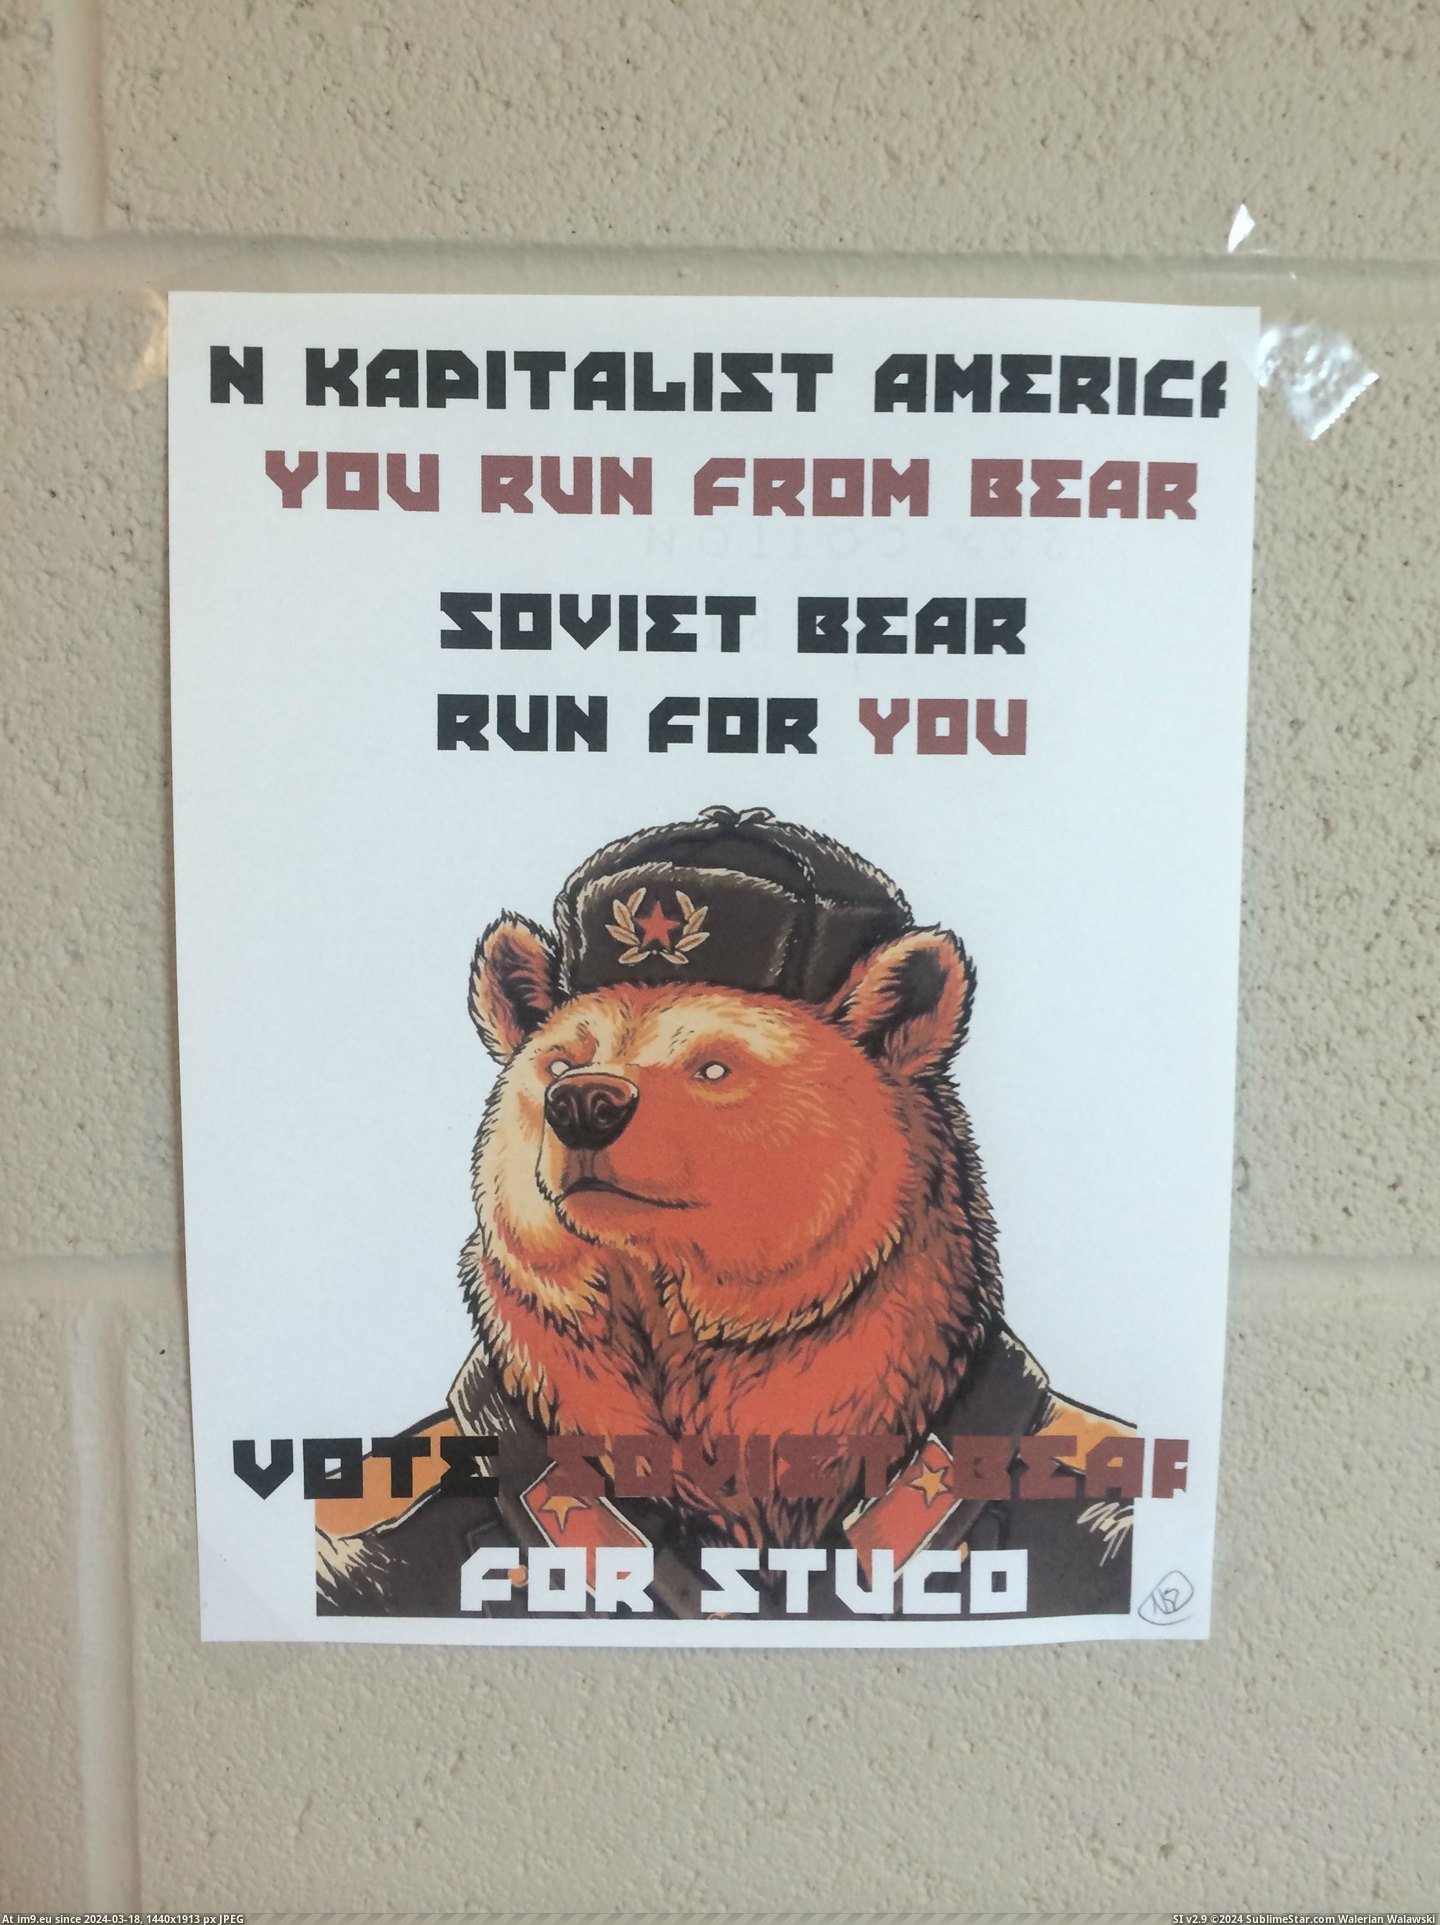 #Funny #School #Decided #Holding #Soviet #Council #Elections #Bear #Student #Run [Funny] So my school is holding elections for student council... and someone has decided to run as Soviet Bear 12 Pic. (Изображение из альбом My r/FUNNY favs))